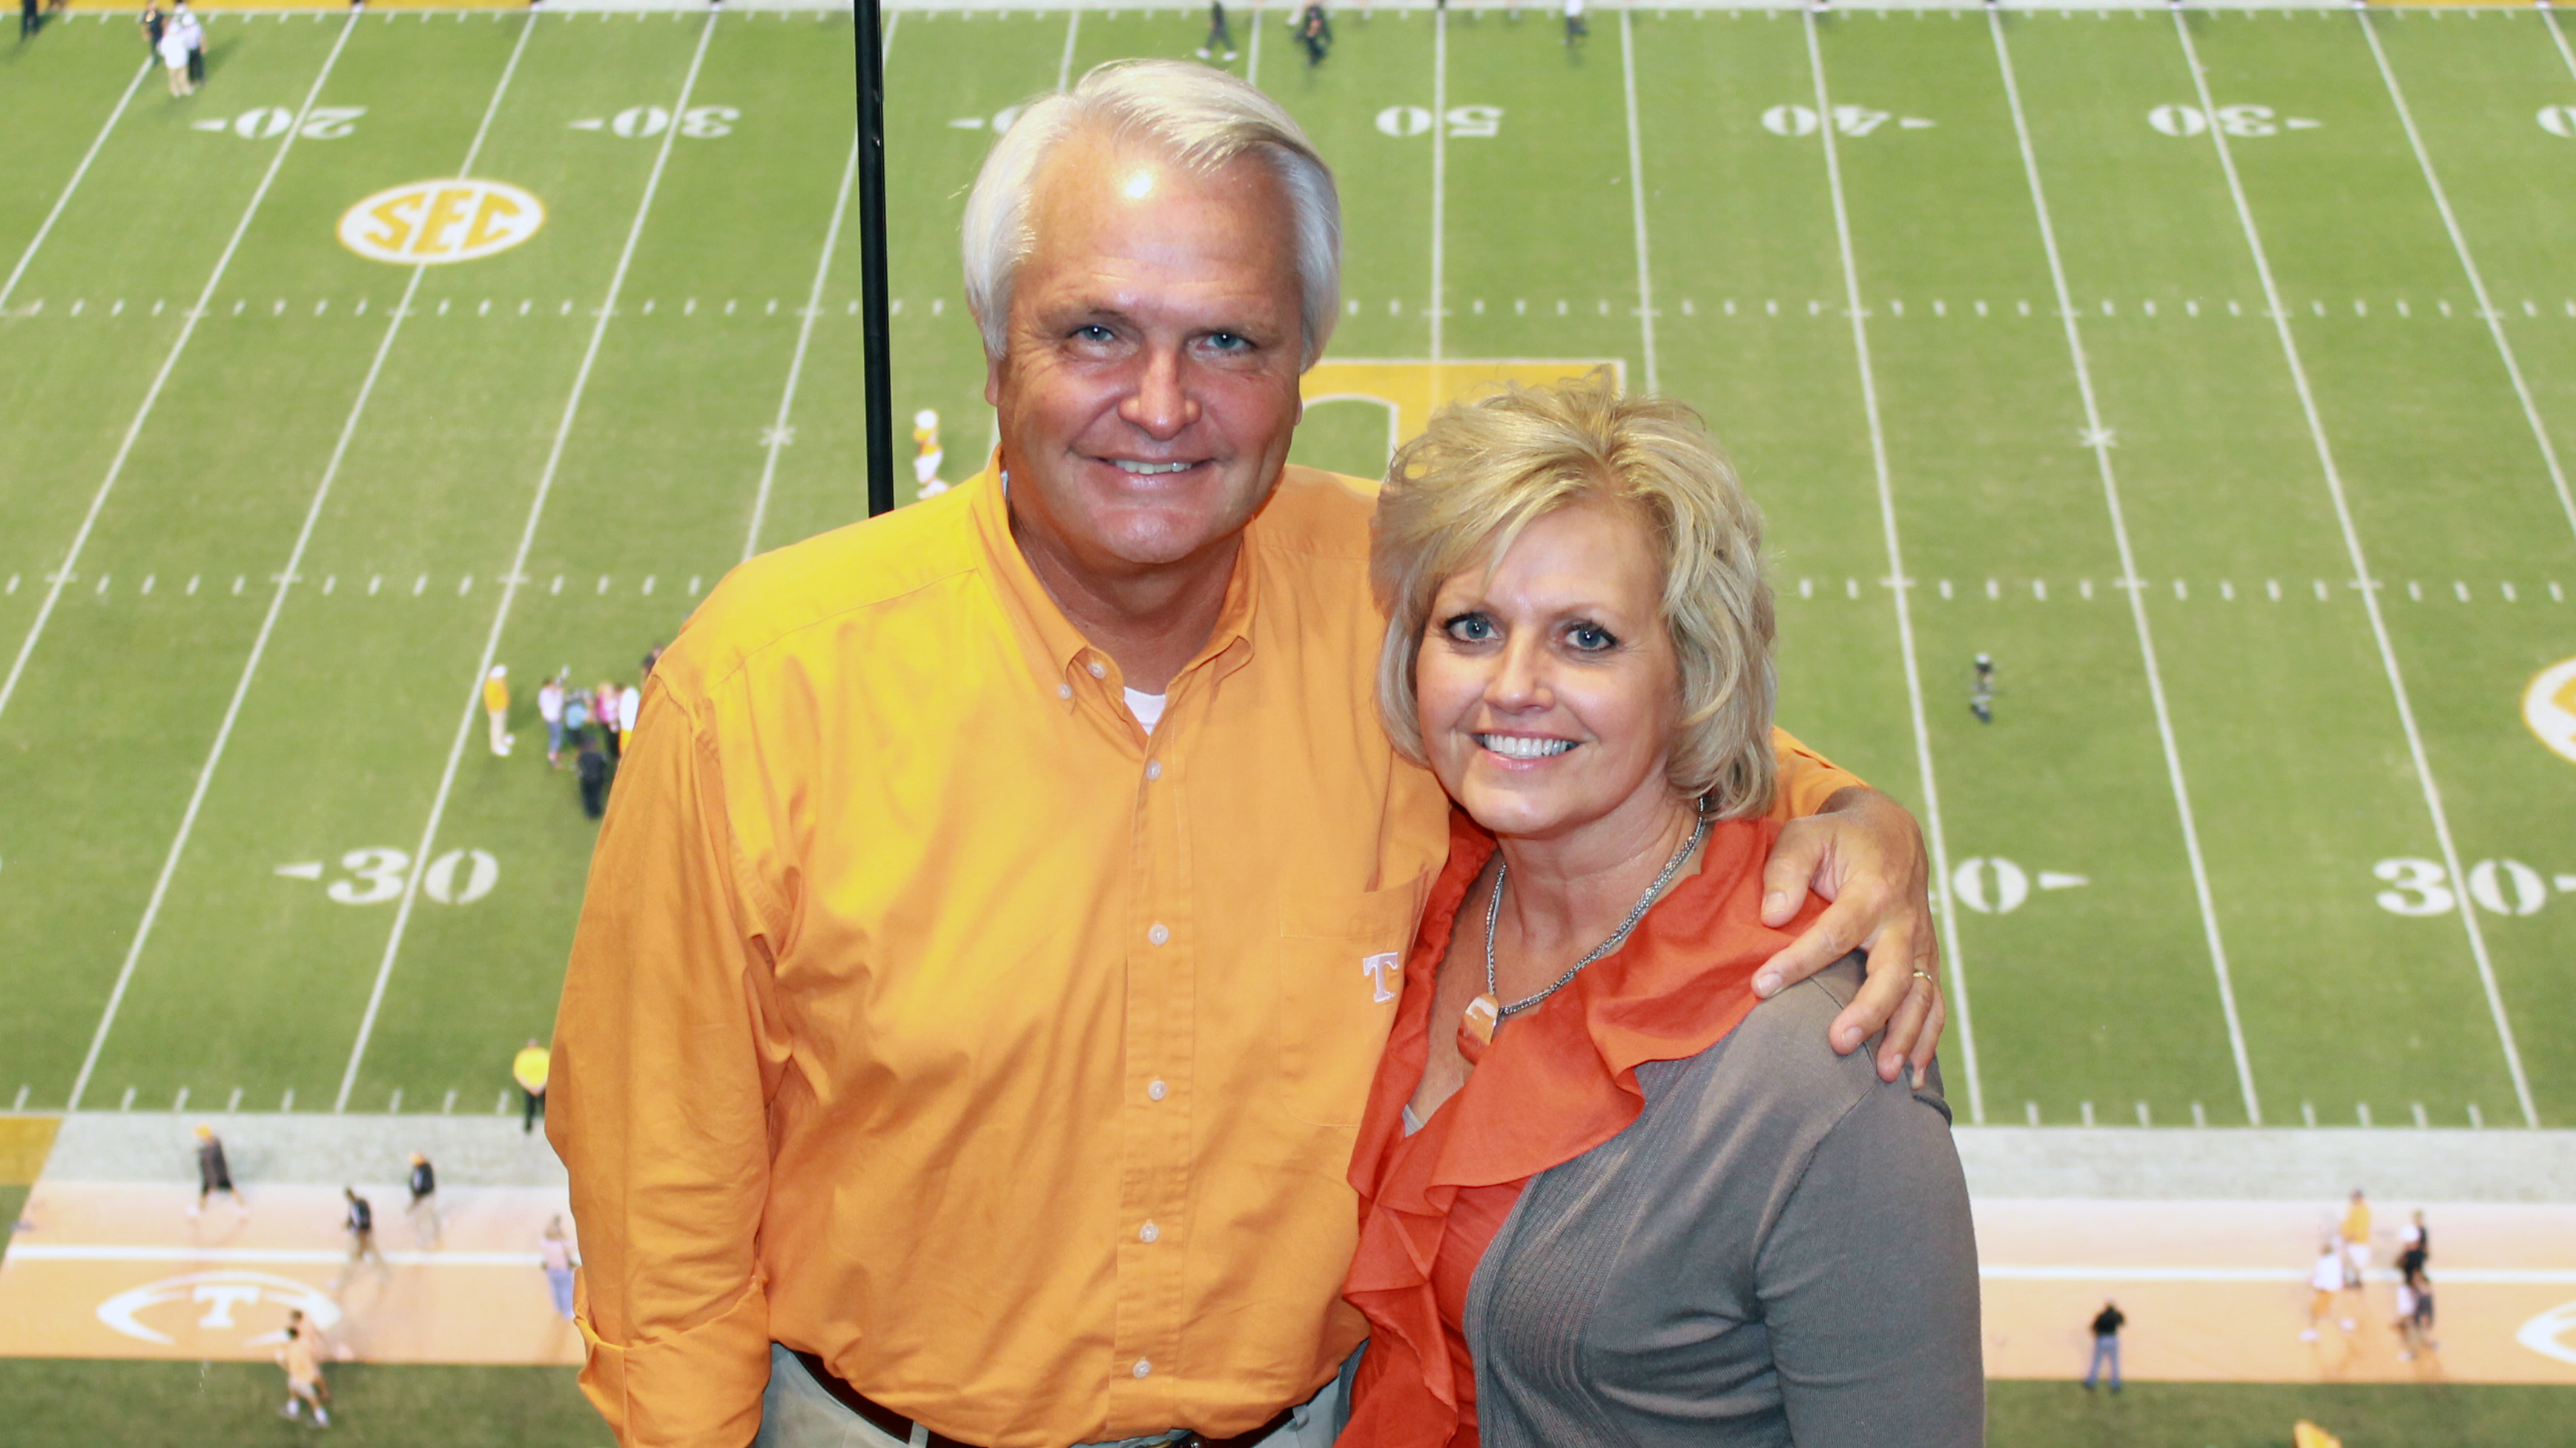 Lt. Gov Ron Ramsey and Wife, Sindy, at a UT Football Game